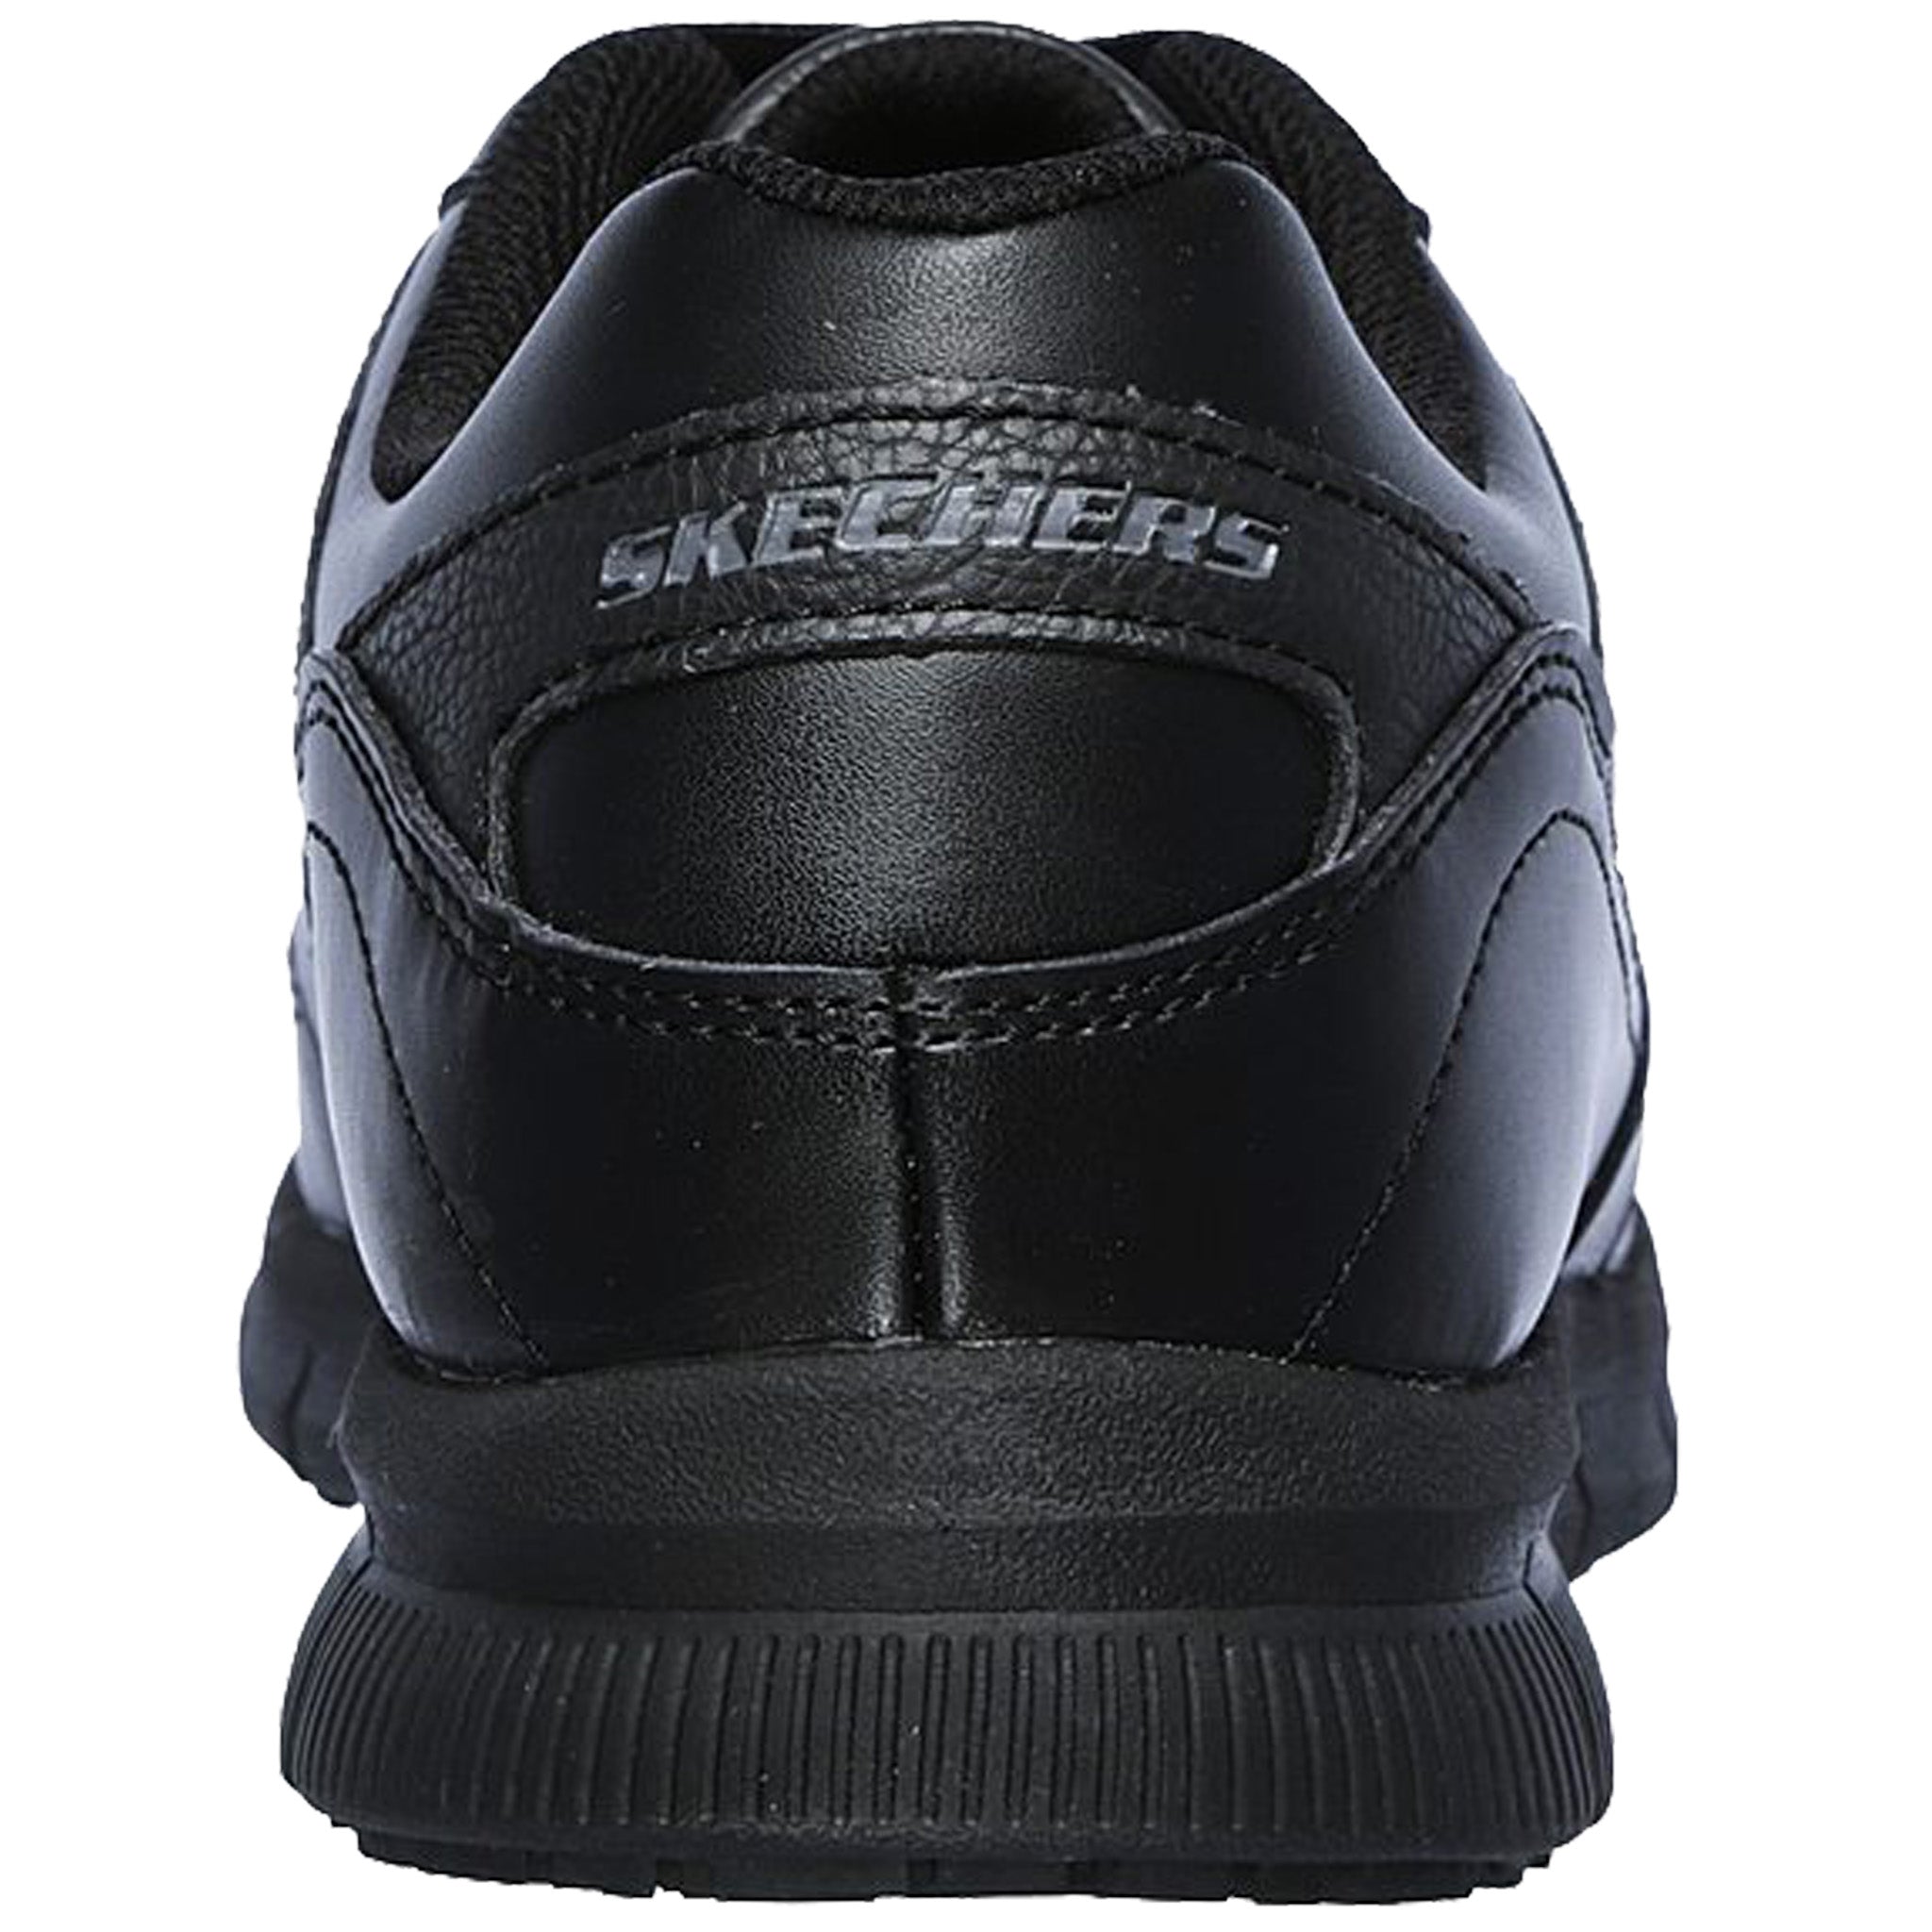 Skechers Men's Nampa Memory Foam Resistant Shoes – That Shoe Store and More